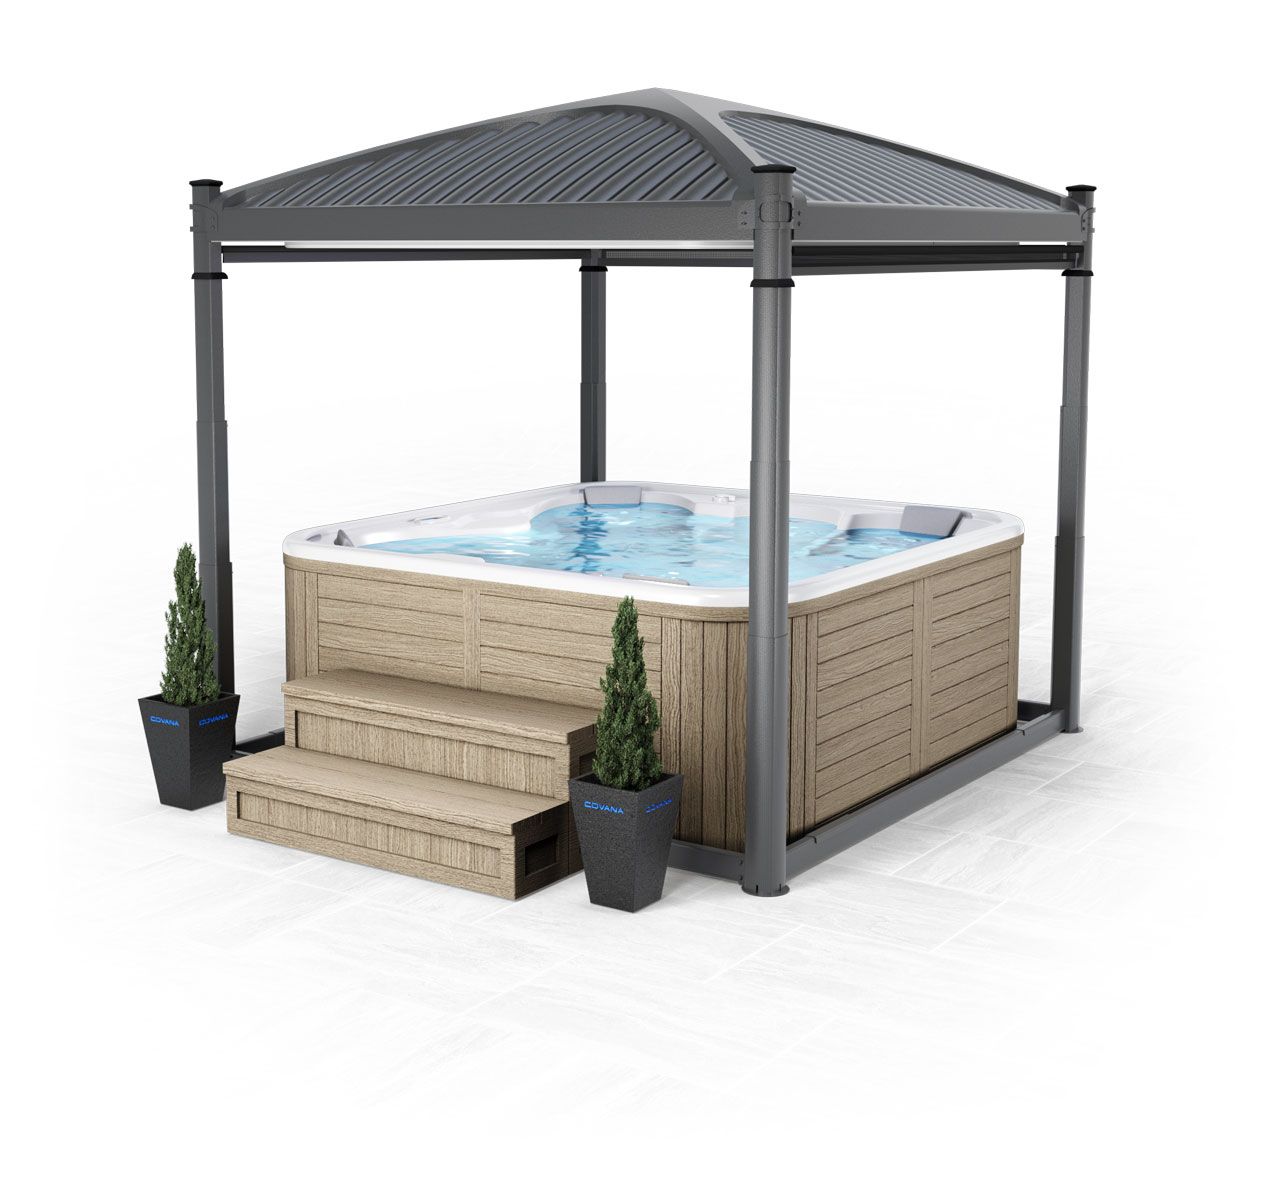 A hot tub under a canopy with steps and potted plants.